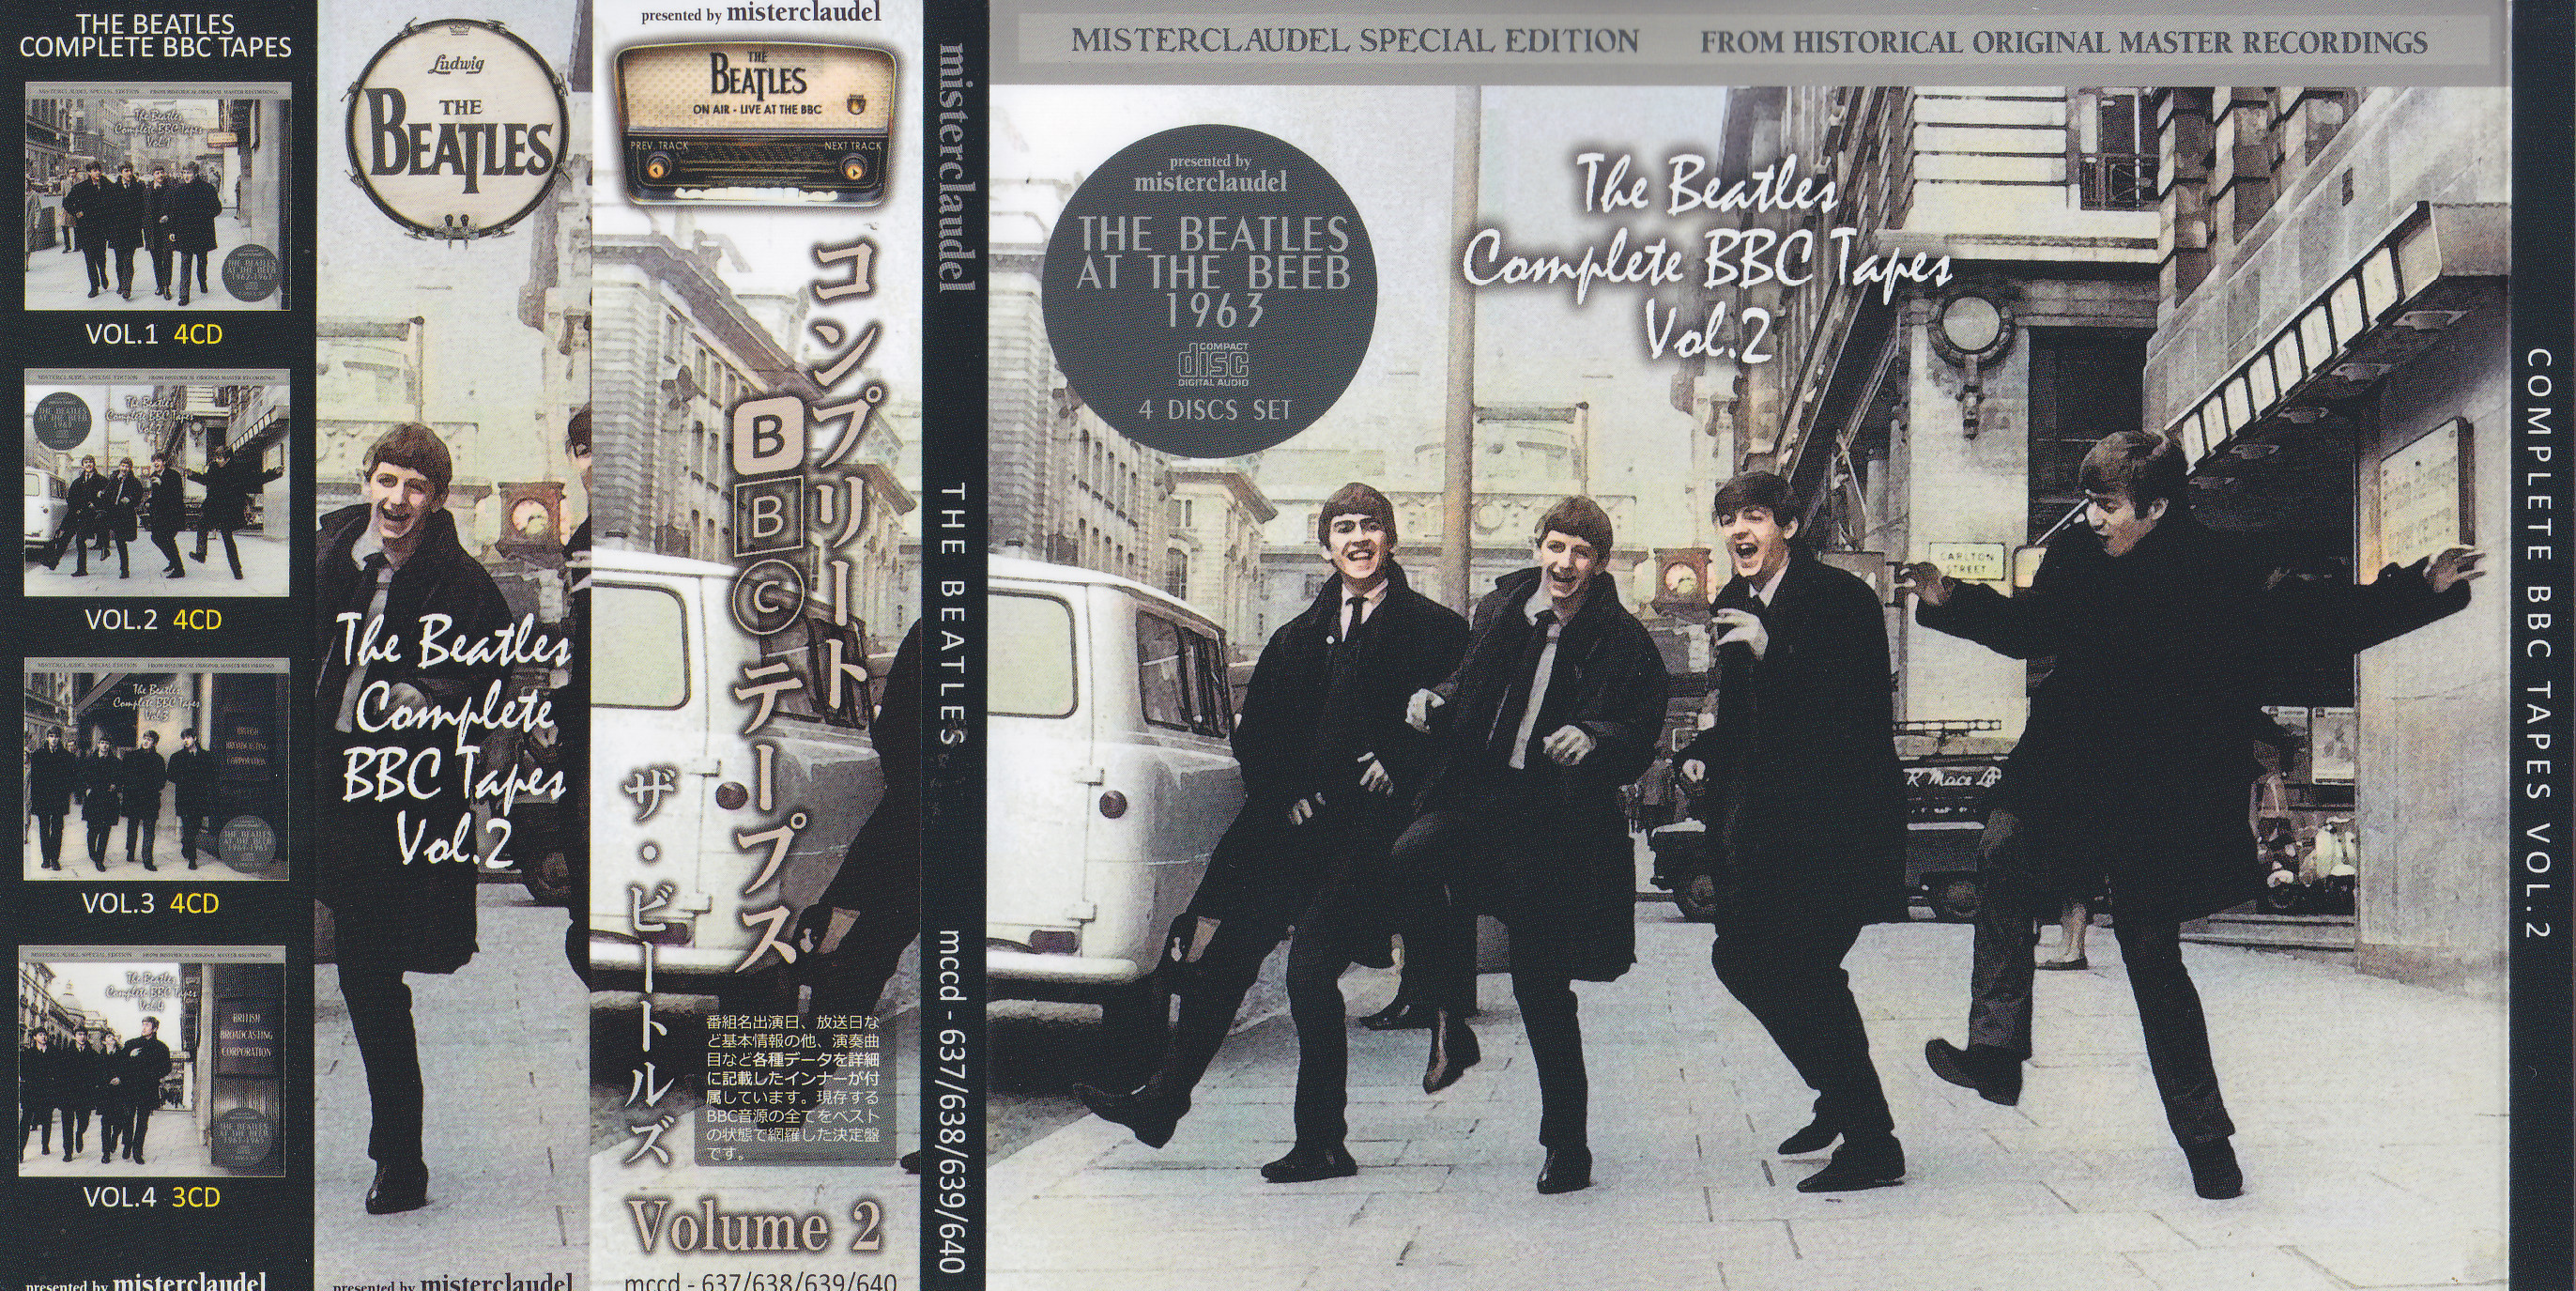 BEATLES COMPLETE BBC TAPES VOL.2